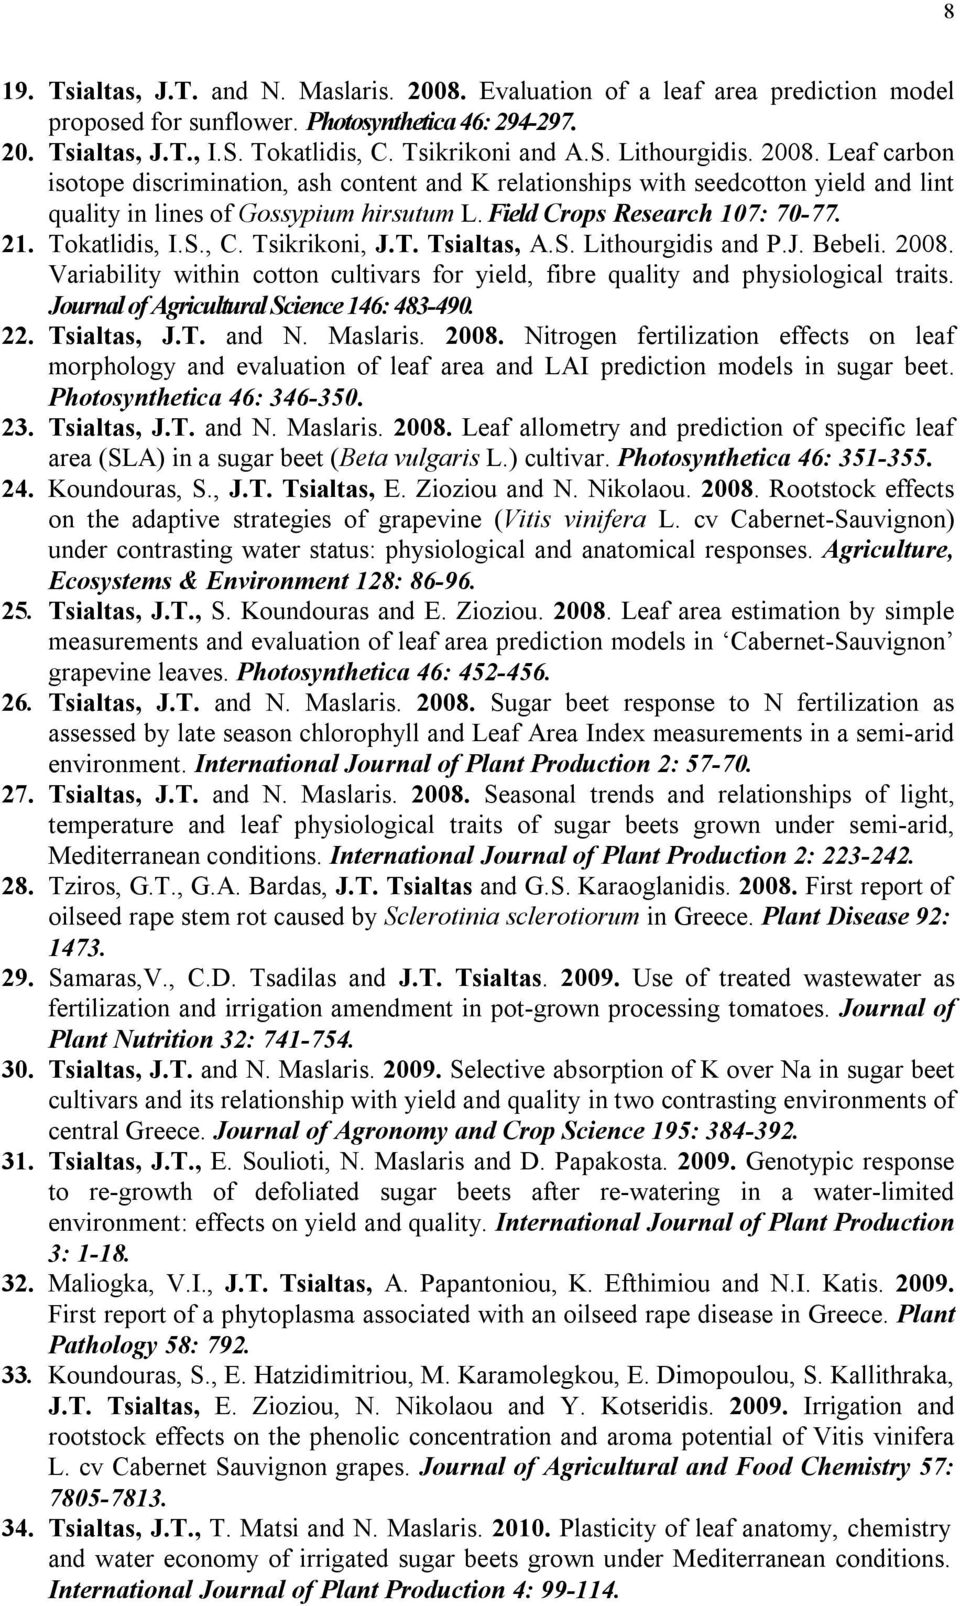 , C. Tsikrikoni, J.T. Tsialtas, A.S. Lithourgidis and P.J. Bebeli. 2008. Variability within cotton cultivars for yield, fibre quality and physiological traits.